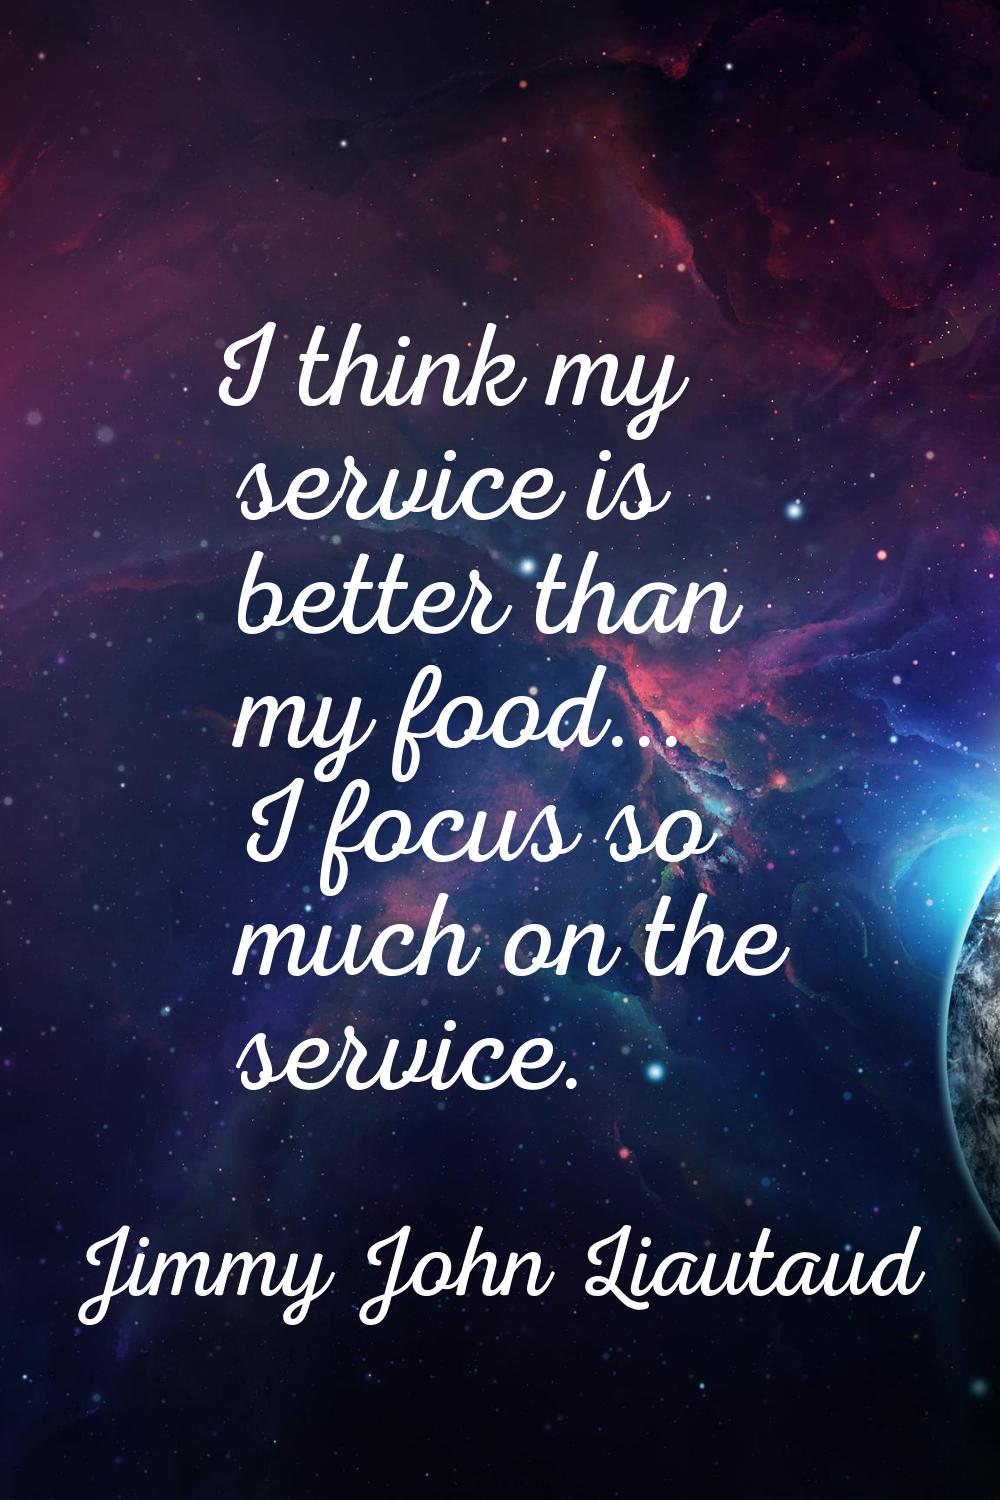 I think my service is better than my food... I focus so much on the service.